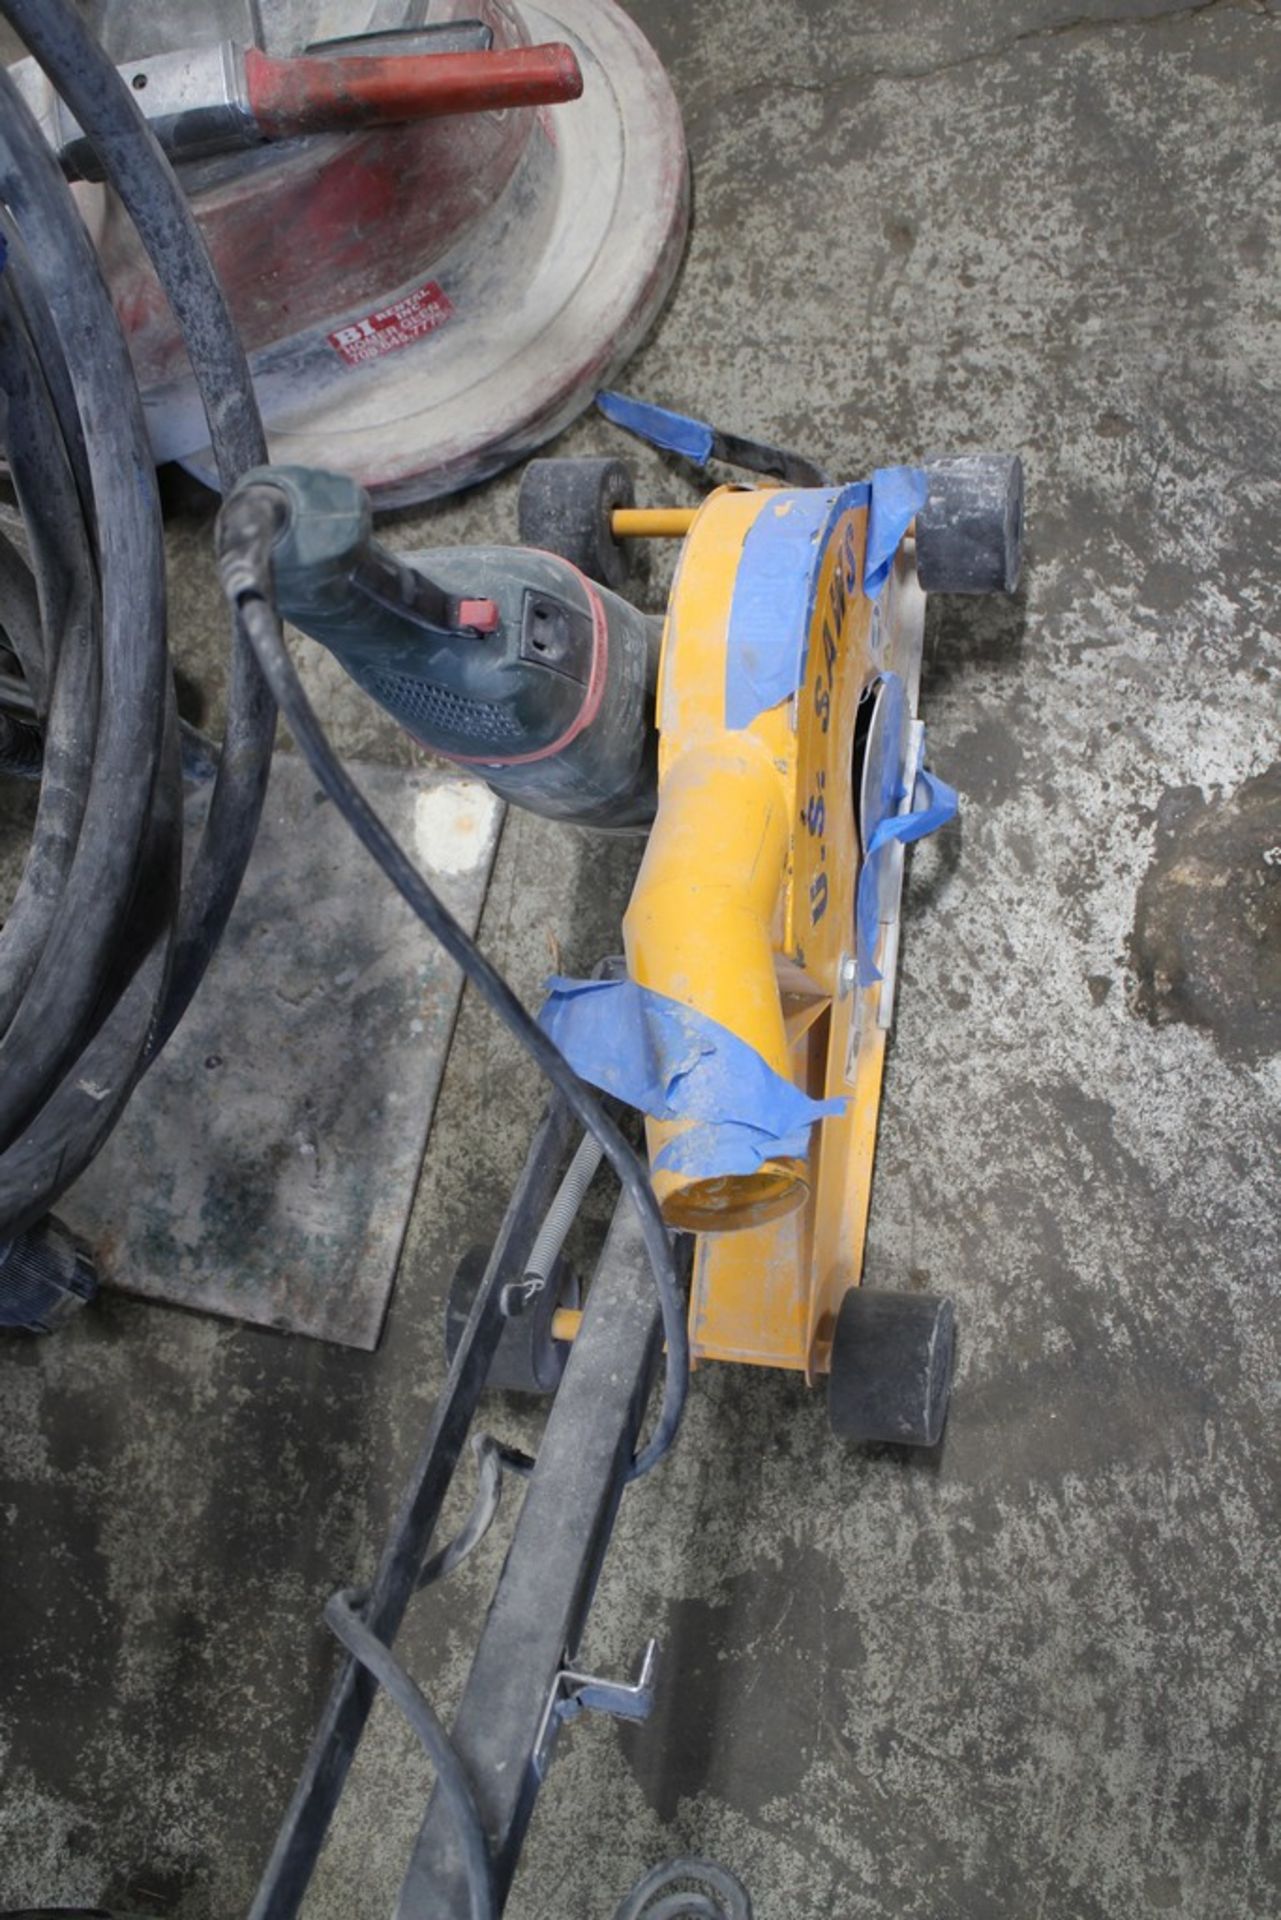 U.S. SAW PORTABLE GRINDER STAND WITH METABO RIGHT ANGLE GRINDER - Image 2 of 2